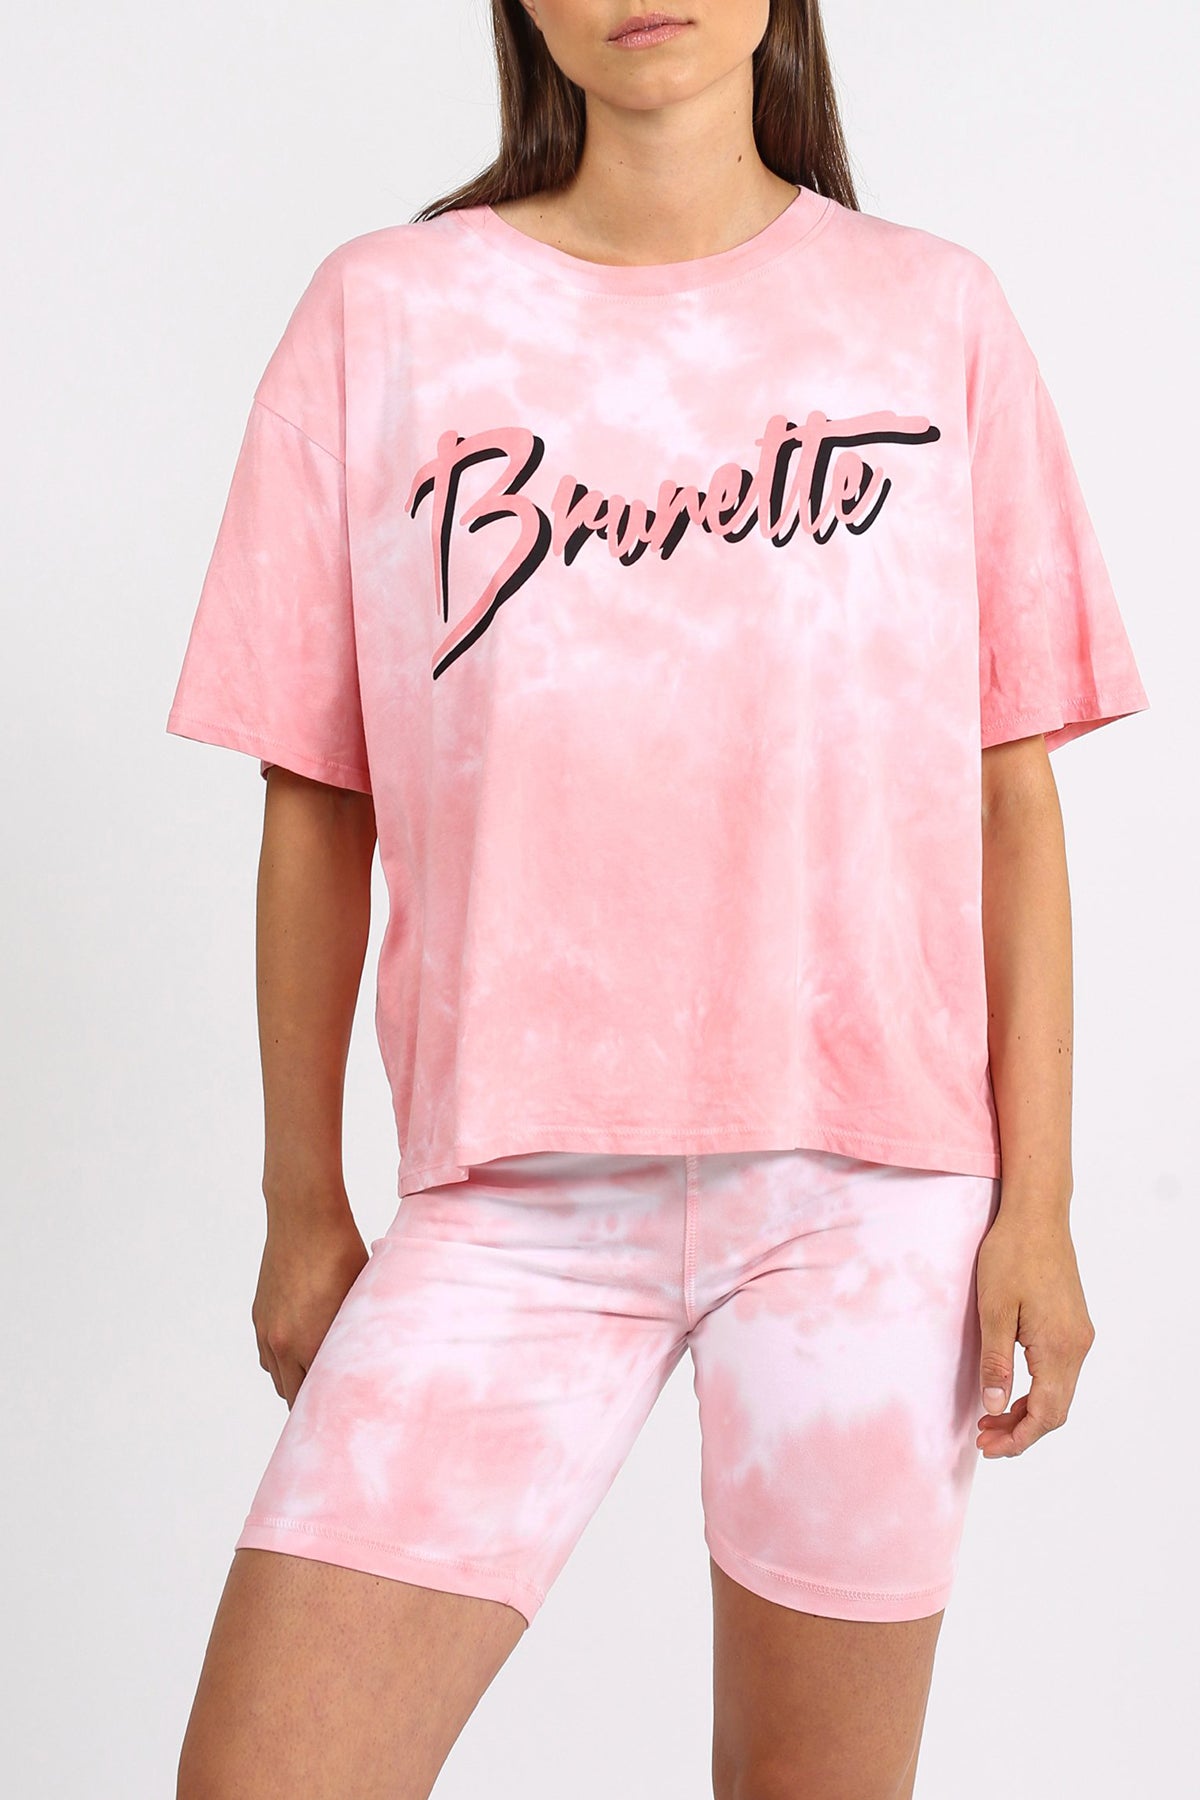 The "BRUNETTE" Pink Marble Tie-Dye Boxy Tee